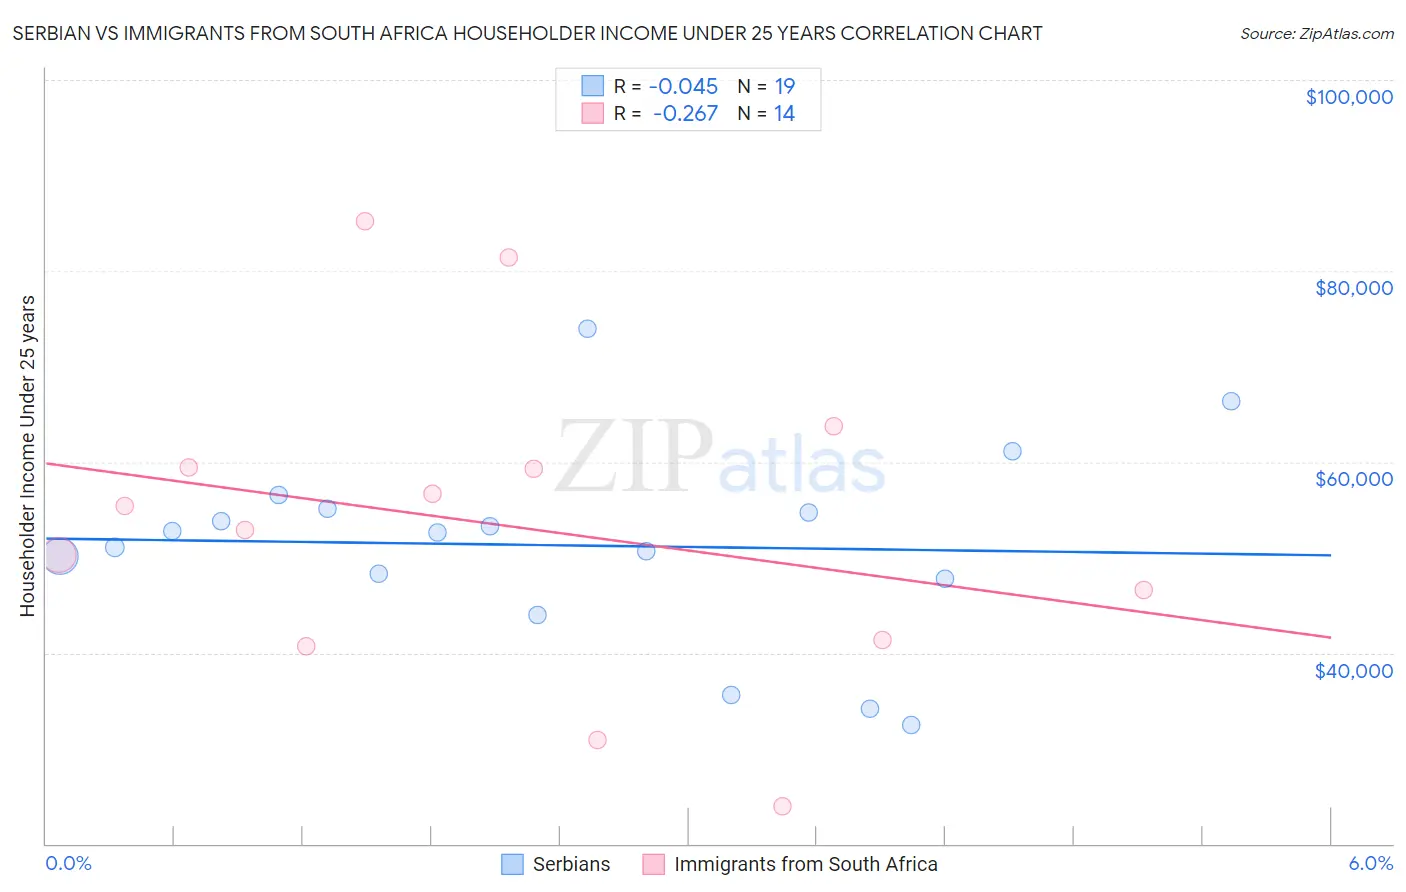 Serbian vs Immigrants from South Africa Householder Income Under 25 years